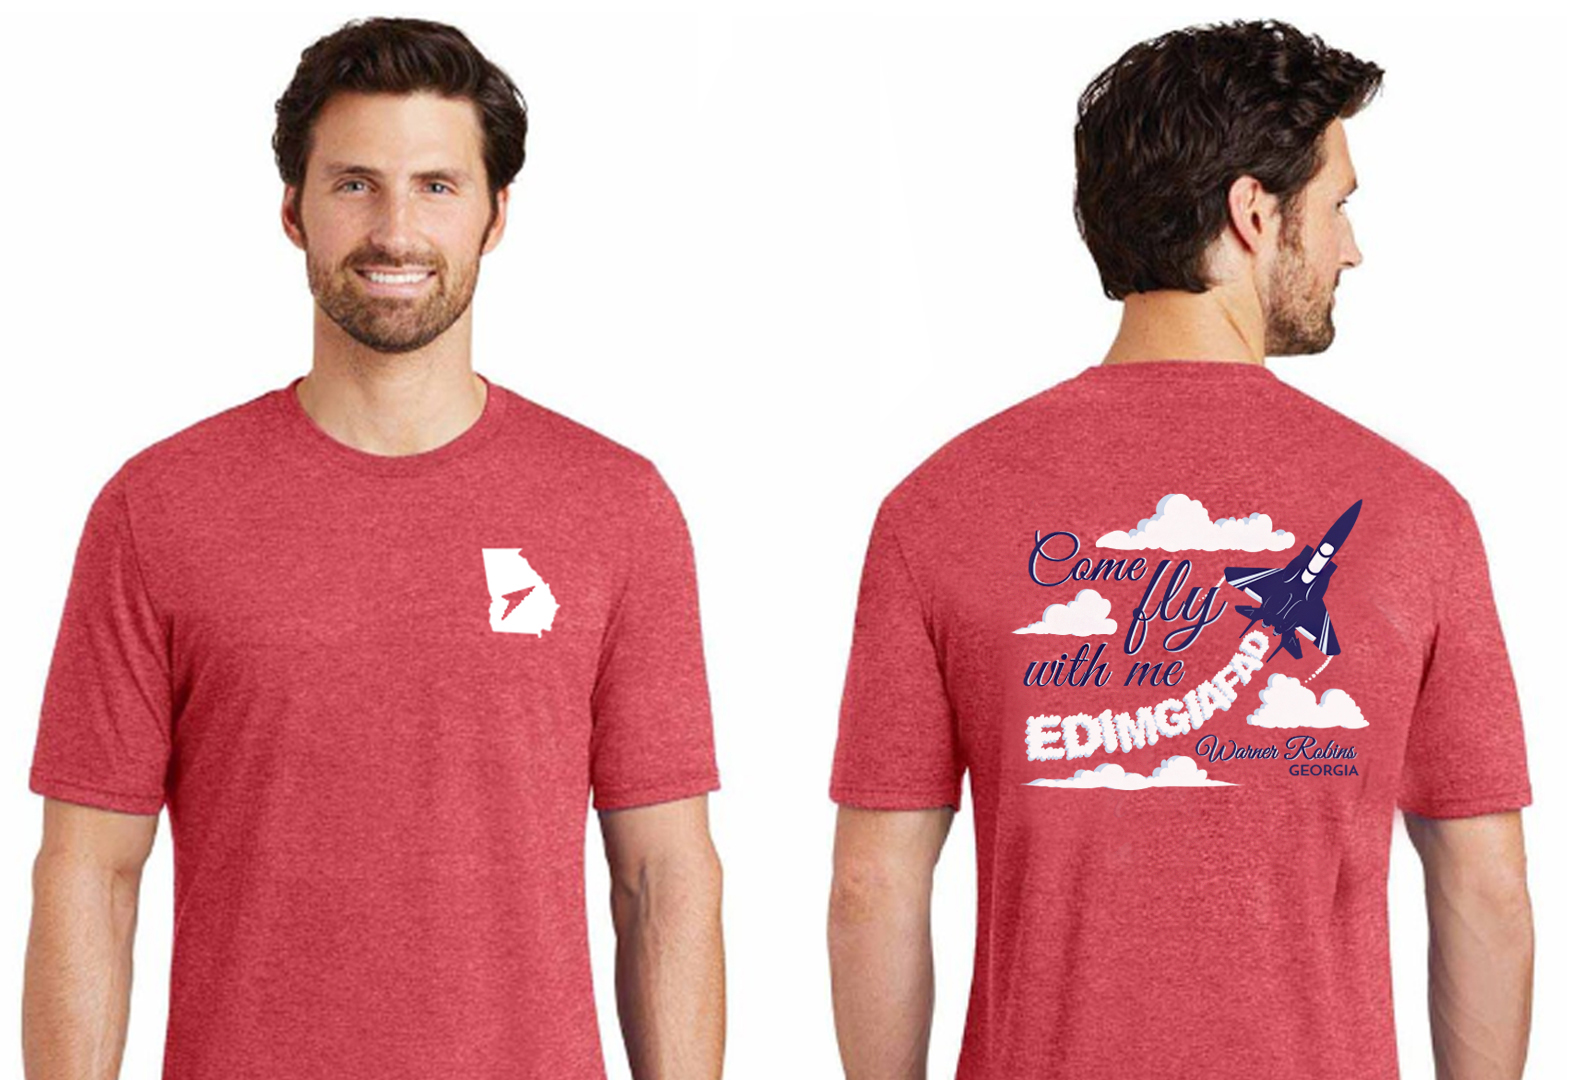 Come Fly with Me - Red Friday Shirt - Warner Robins